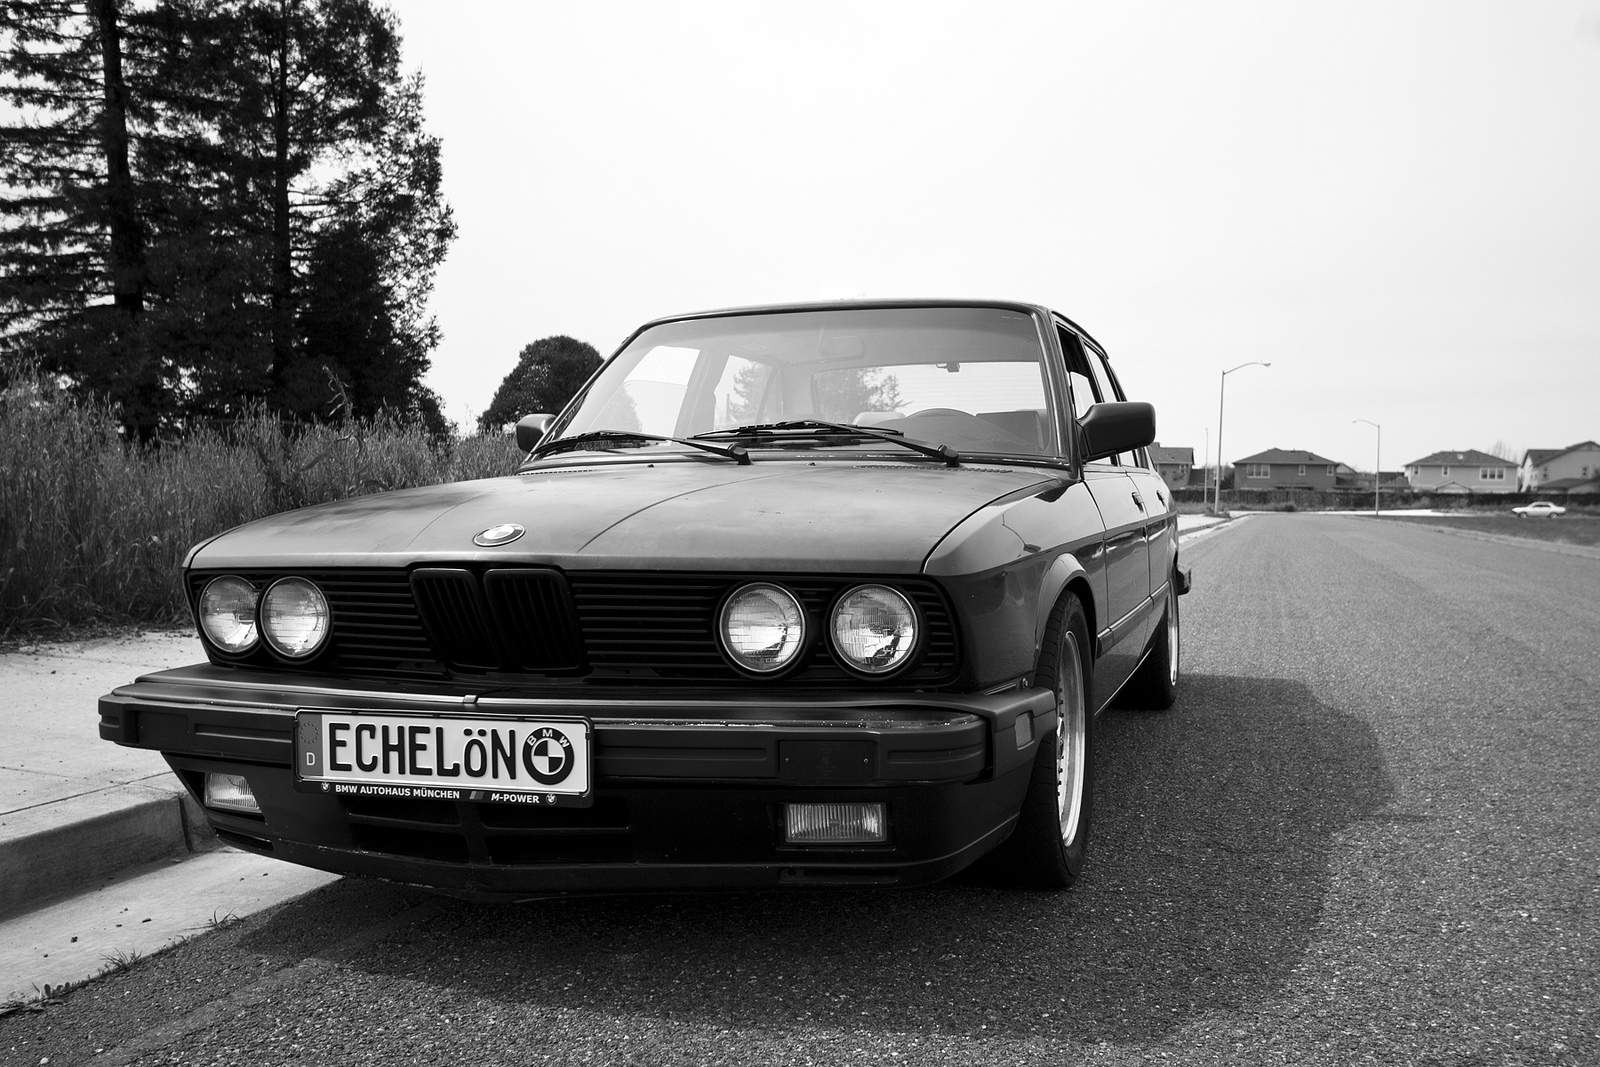 New car! - 1988 BMW 535is | Flickr - Photo Sharing!